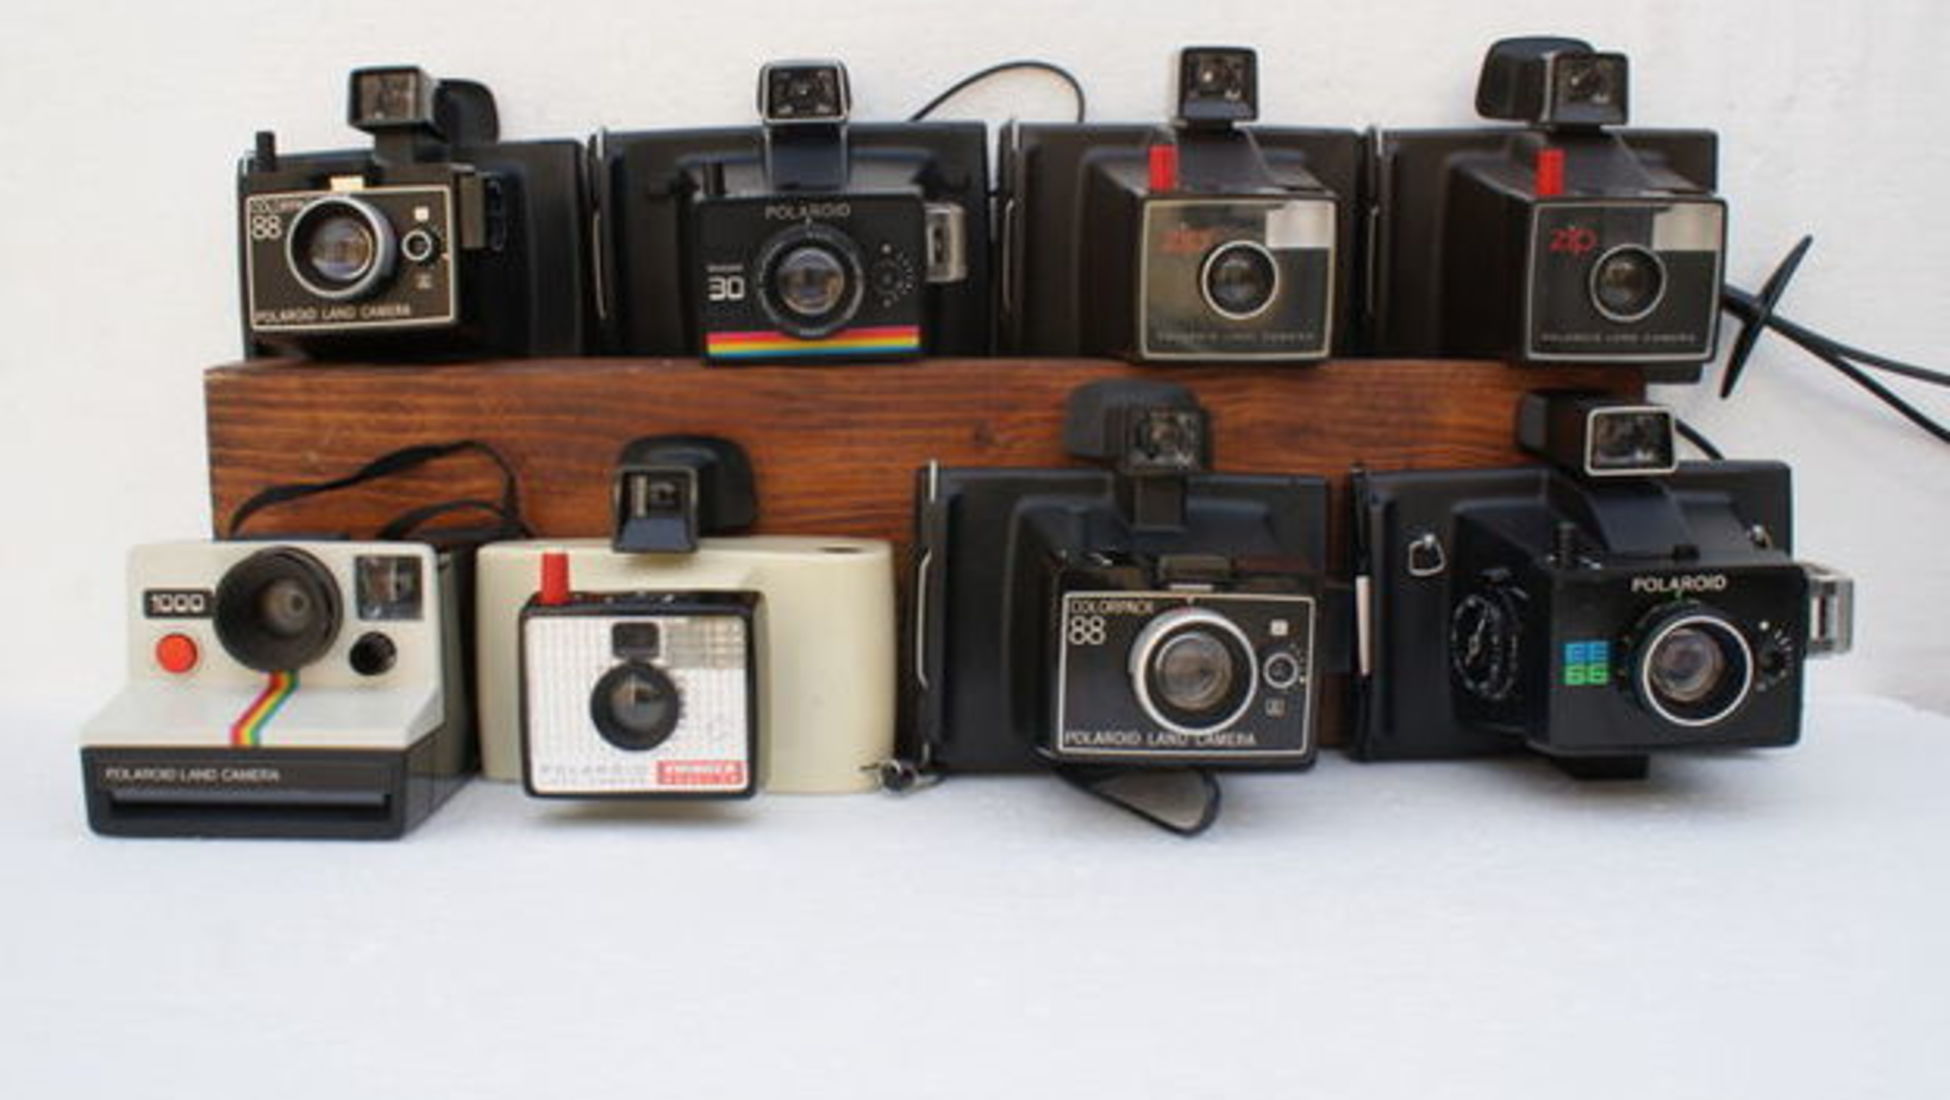 Læge hvidløg Thicken How much is your old Polaroid camera worth? - Catawiki